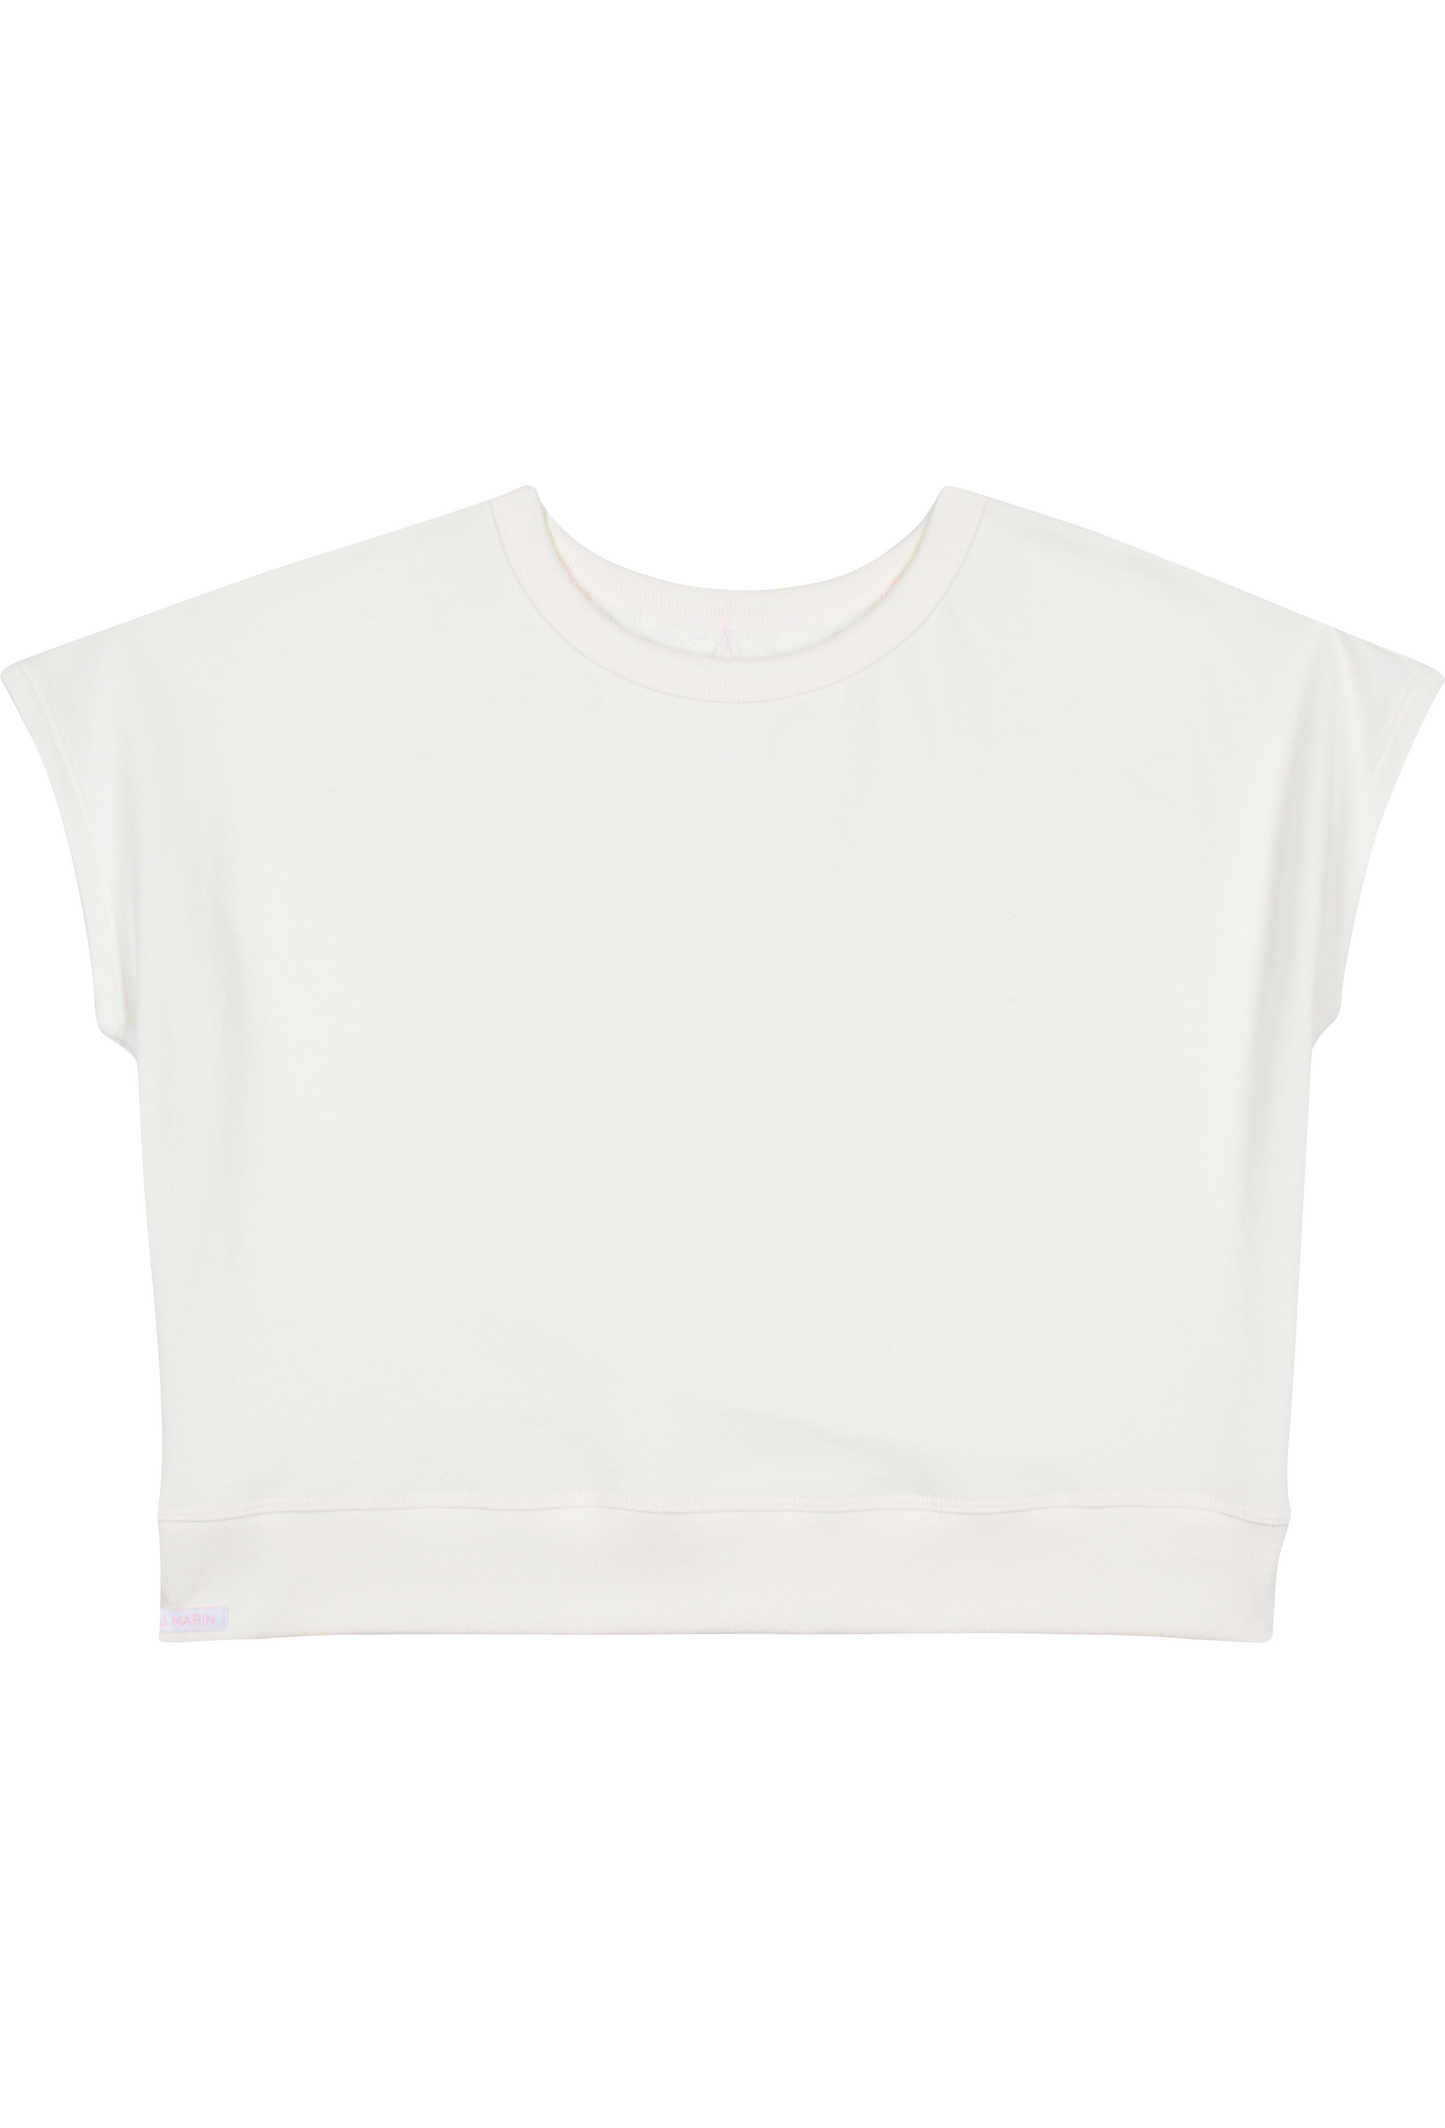 80's Retro French Terry Crop Top - Organic Cotton - Natural/Rosewater Pink - J. Marin